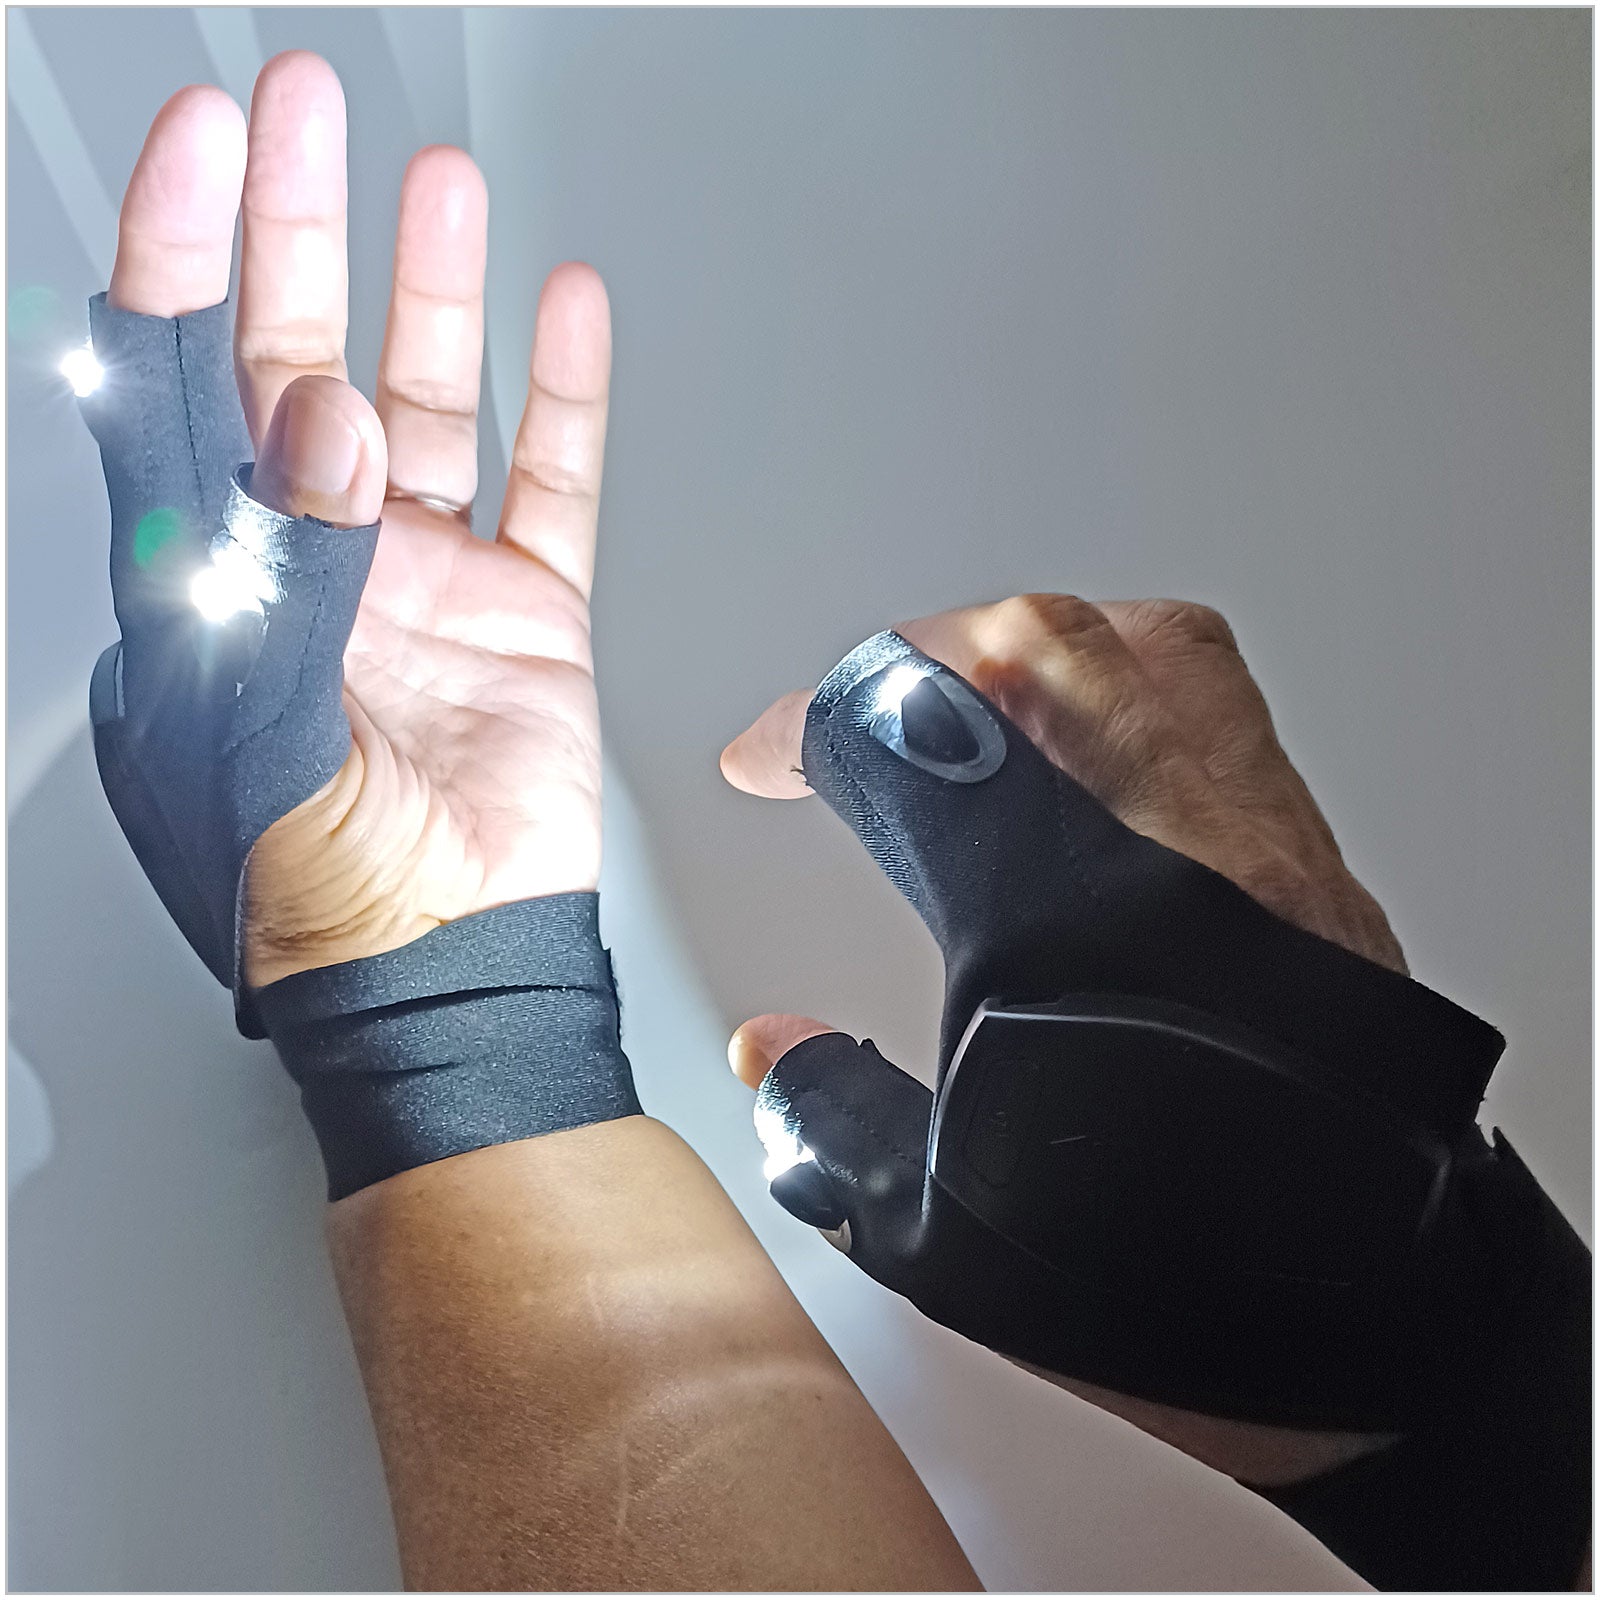 HandyBRYTE Glove - Mounted LED Light System by Micro - Mark - Micro - Mark Hobby Supplies